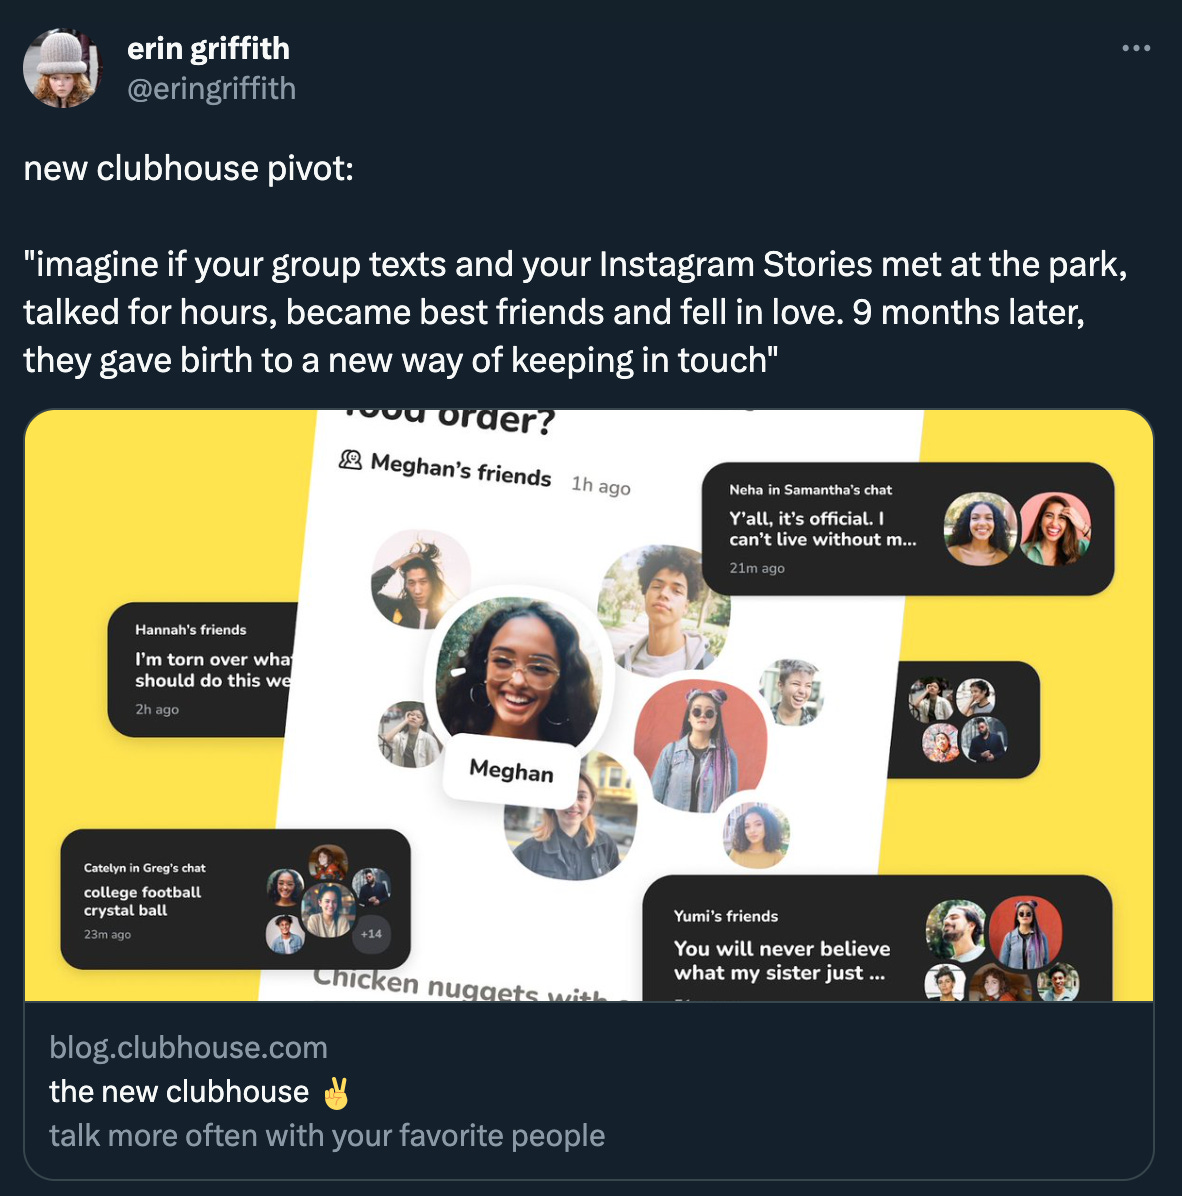 Erin Griffith tweeted: ”new clubhouse pivot:” quoting from Clubhouse’s linked blog post: "imagine if your group texts and your Instagram Stories met at the park, talked for hours, became best friends and fell in love. 9 months later, they gave birth to a new way of keeping in touch," which I assume was written by Hannibal Lecter.